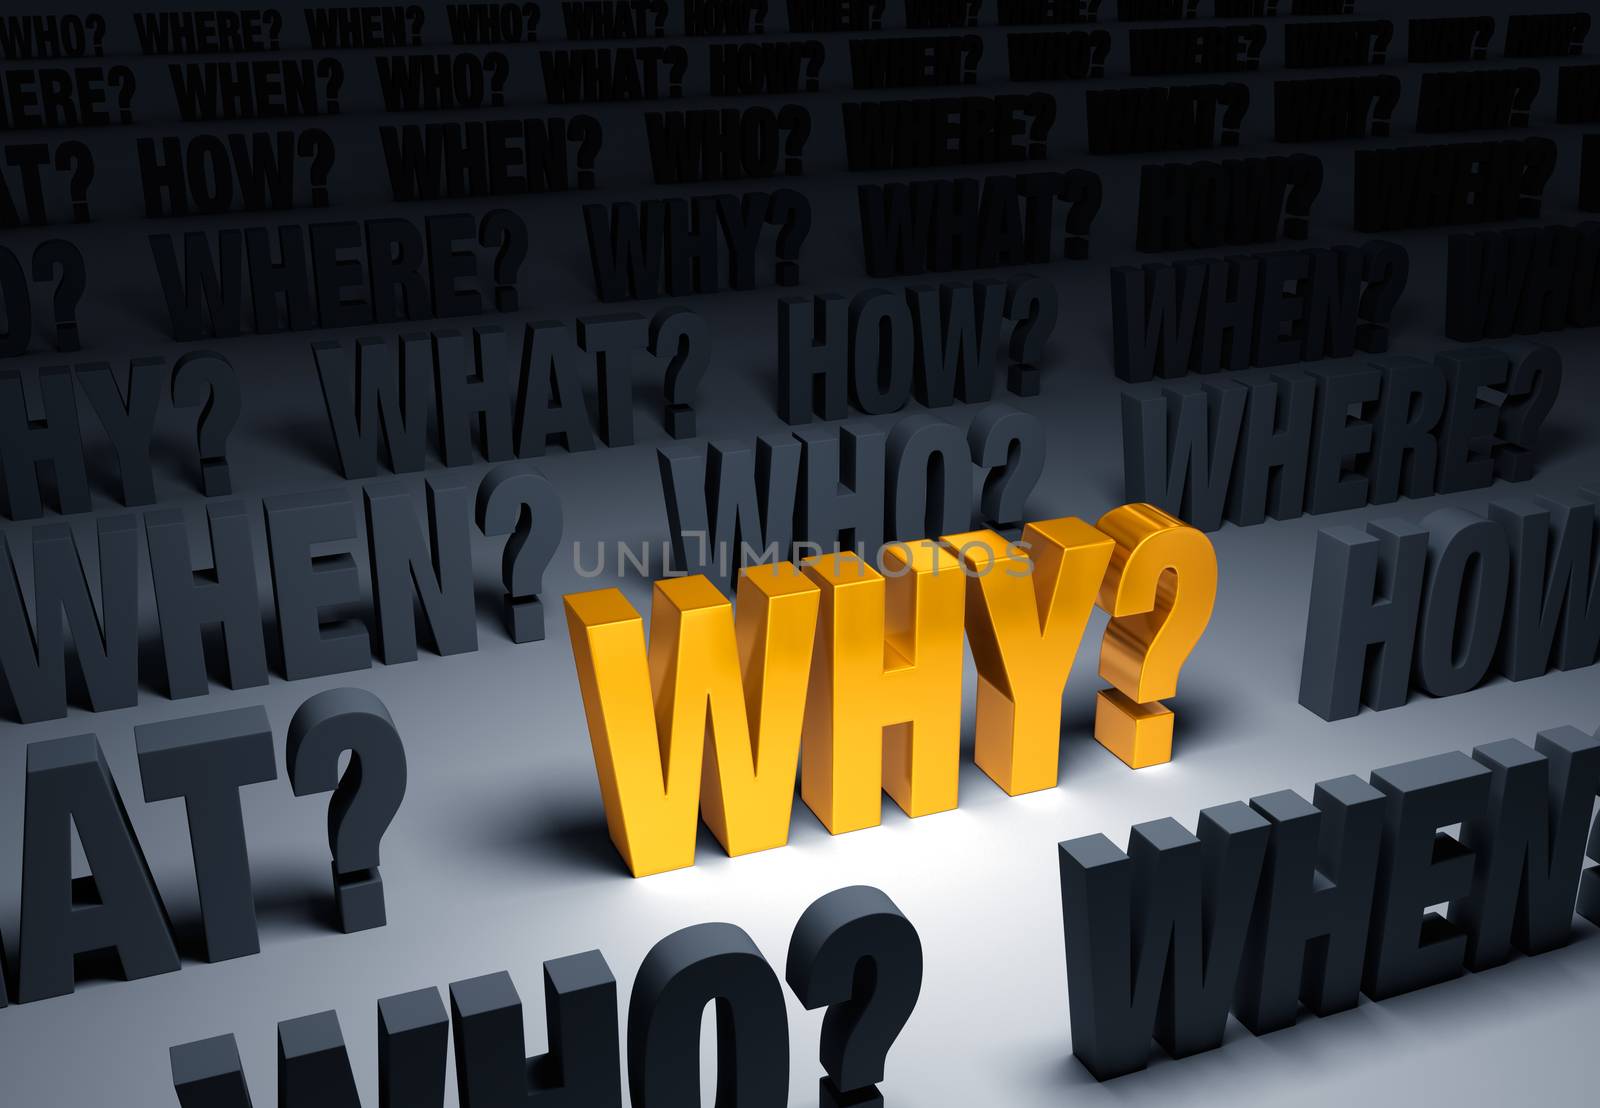 A bright, gold "WHY?" stands out in a dark background filled with "WHO?", "WHAT?", "WHEN?", "WHERE?", and "HOW?" 